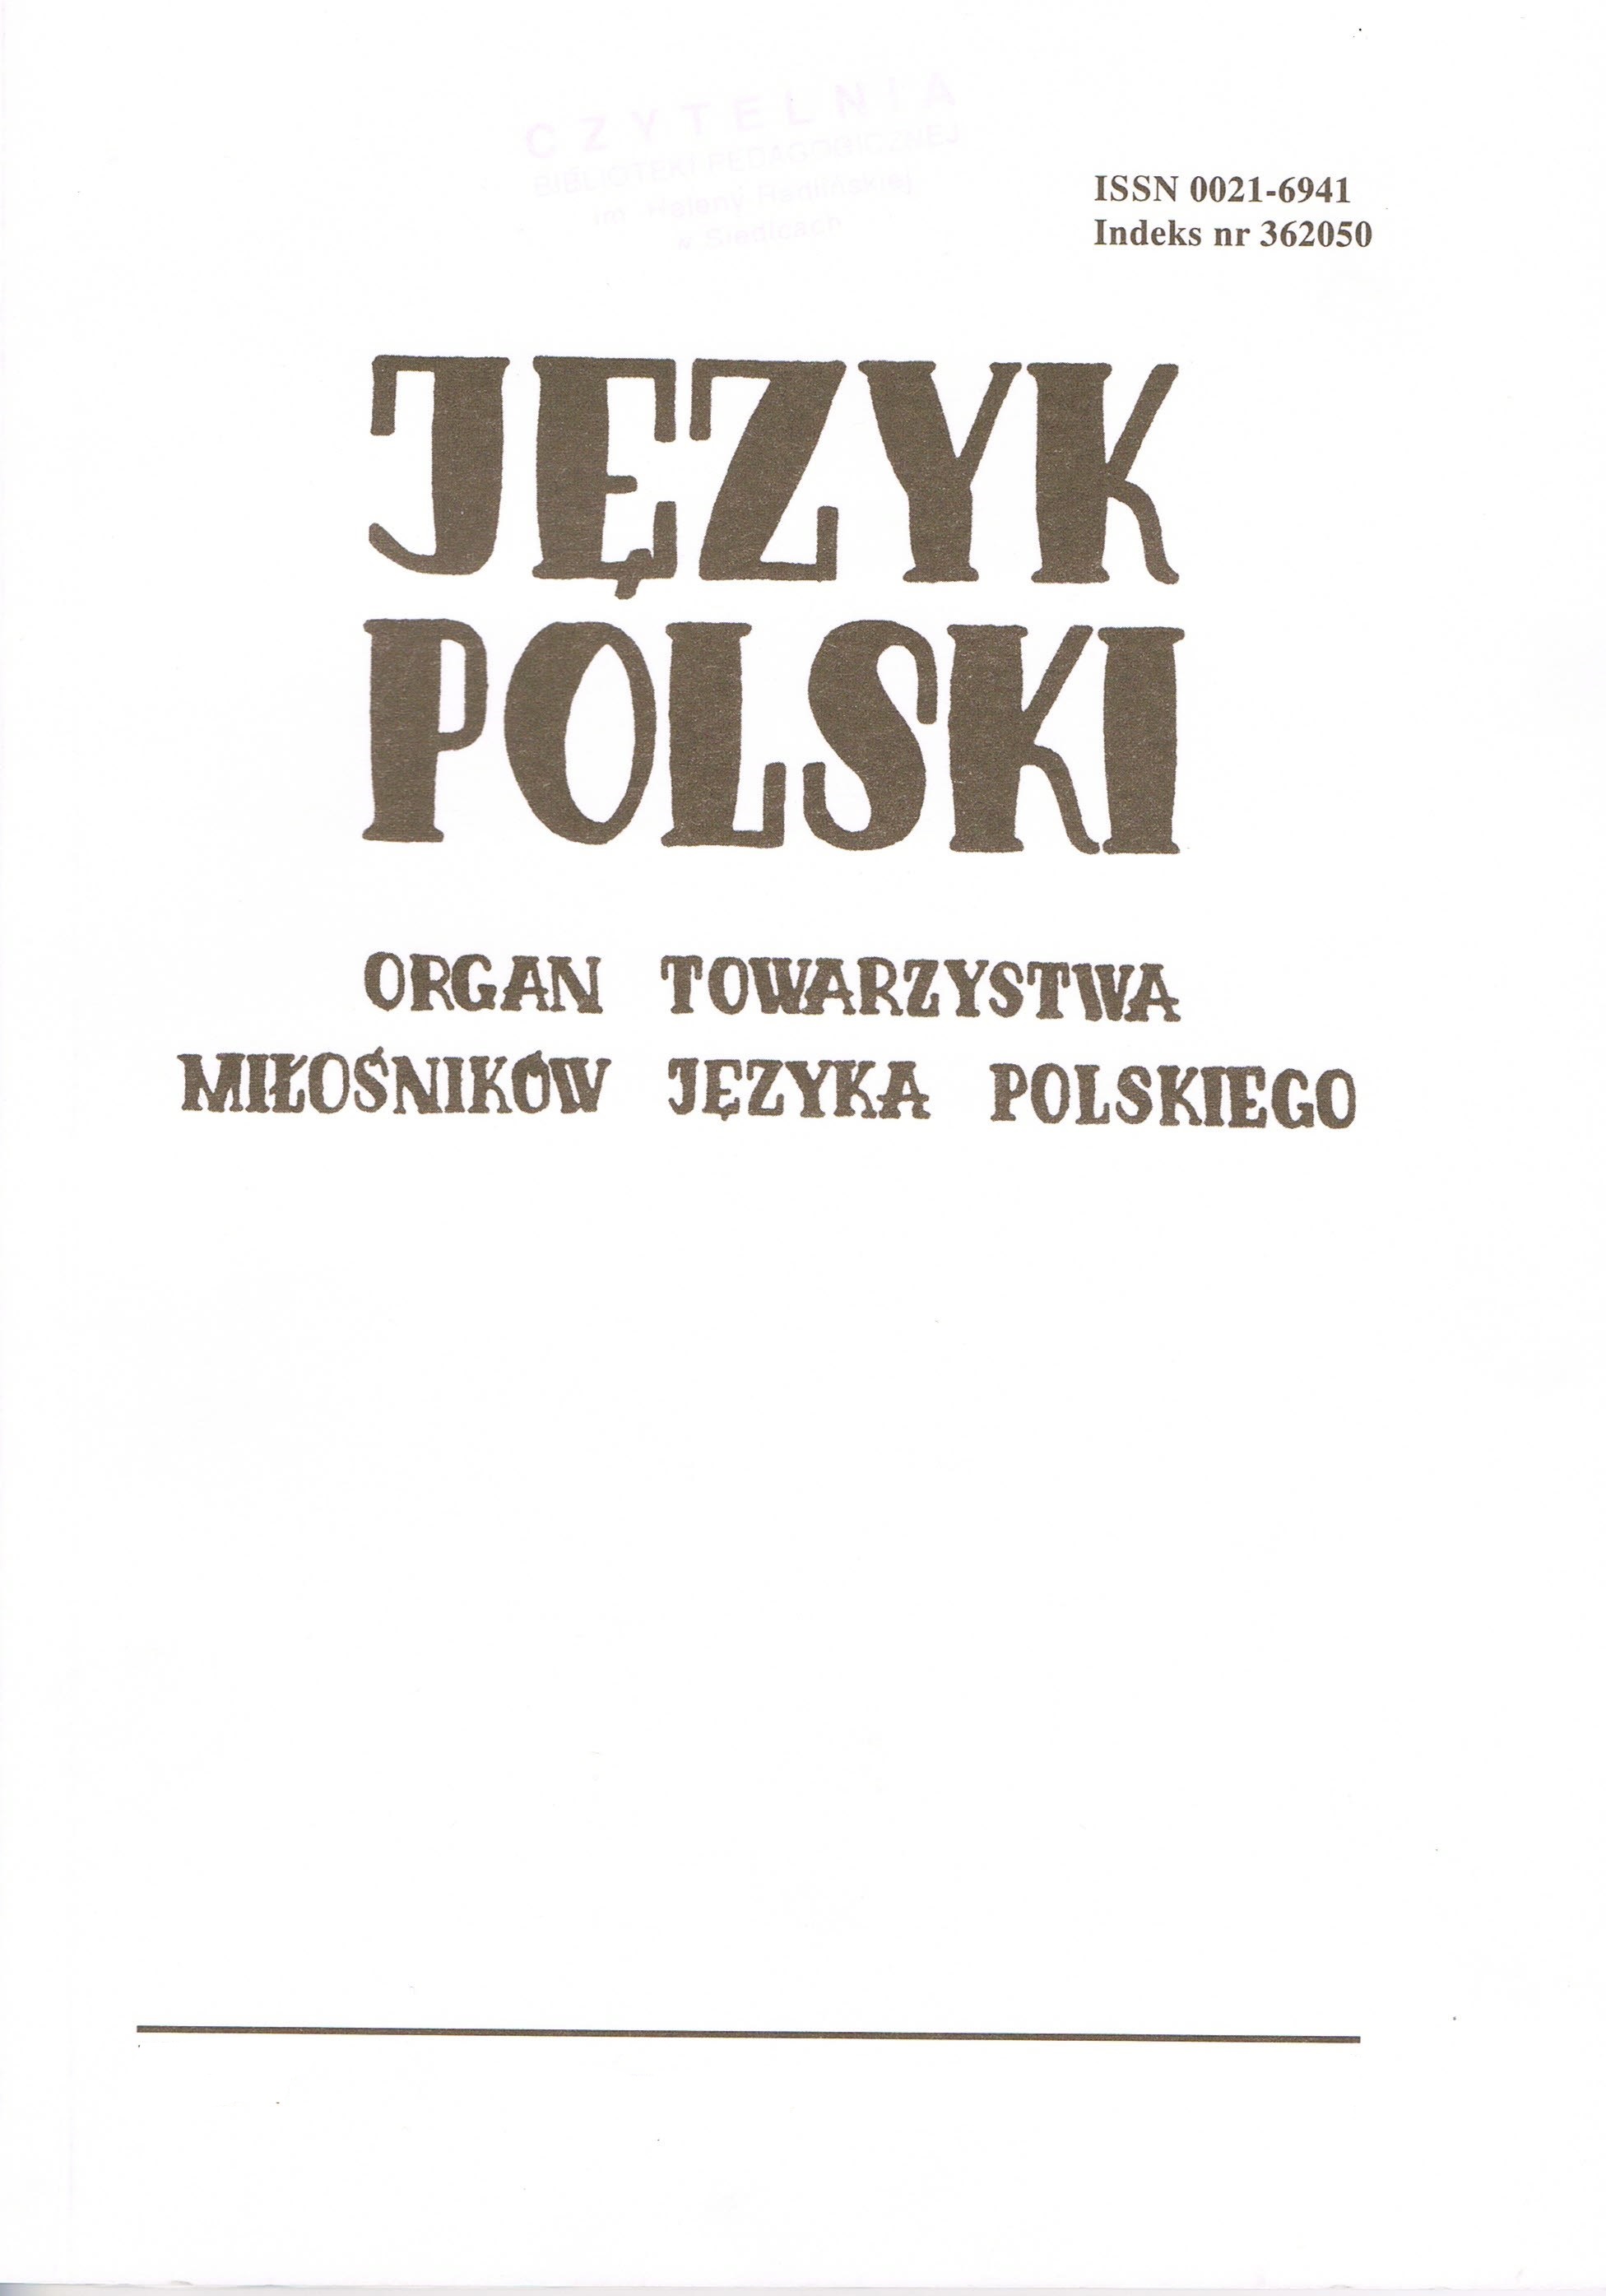 "Deszcza" or "deszczu"? Some remarks about a typesetting “incident” and the lesson drawn from it Cover Image